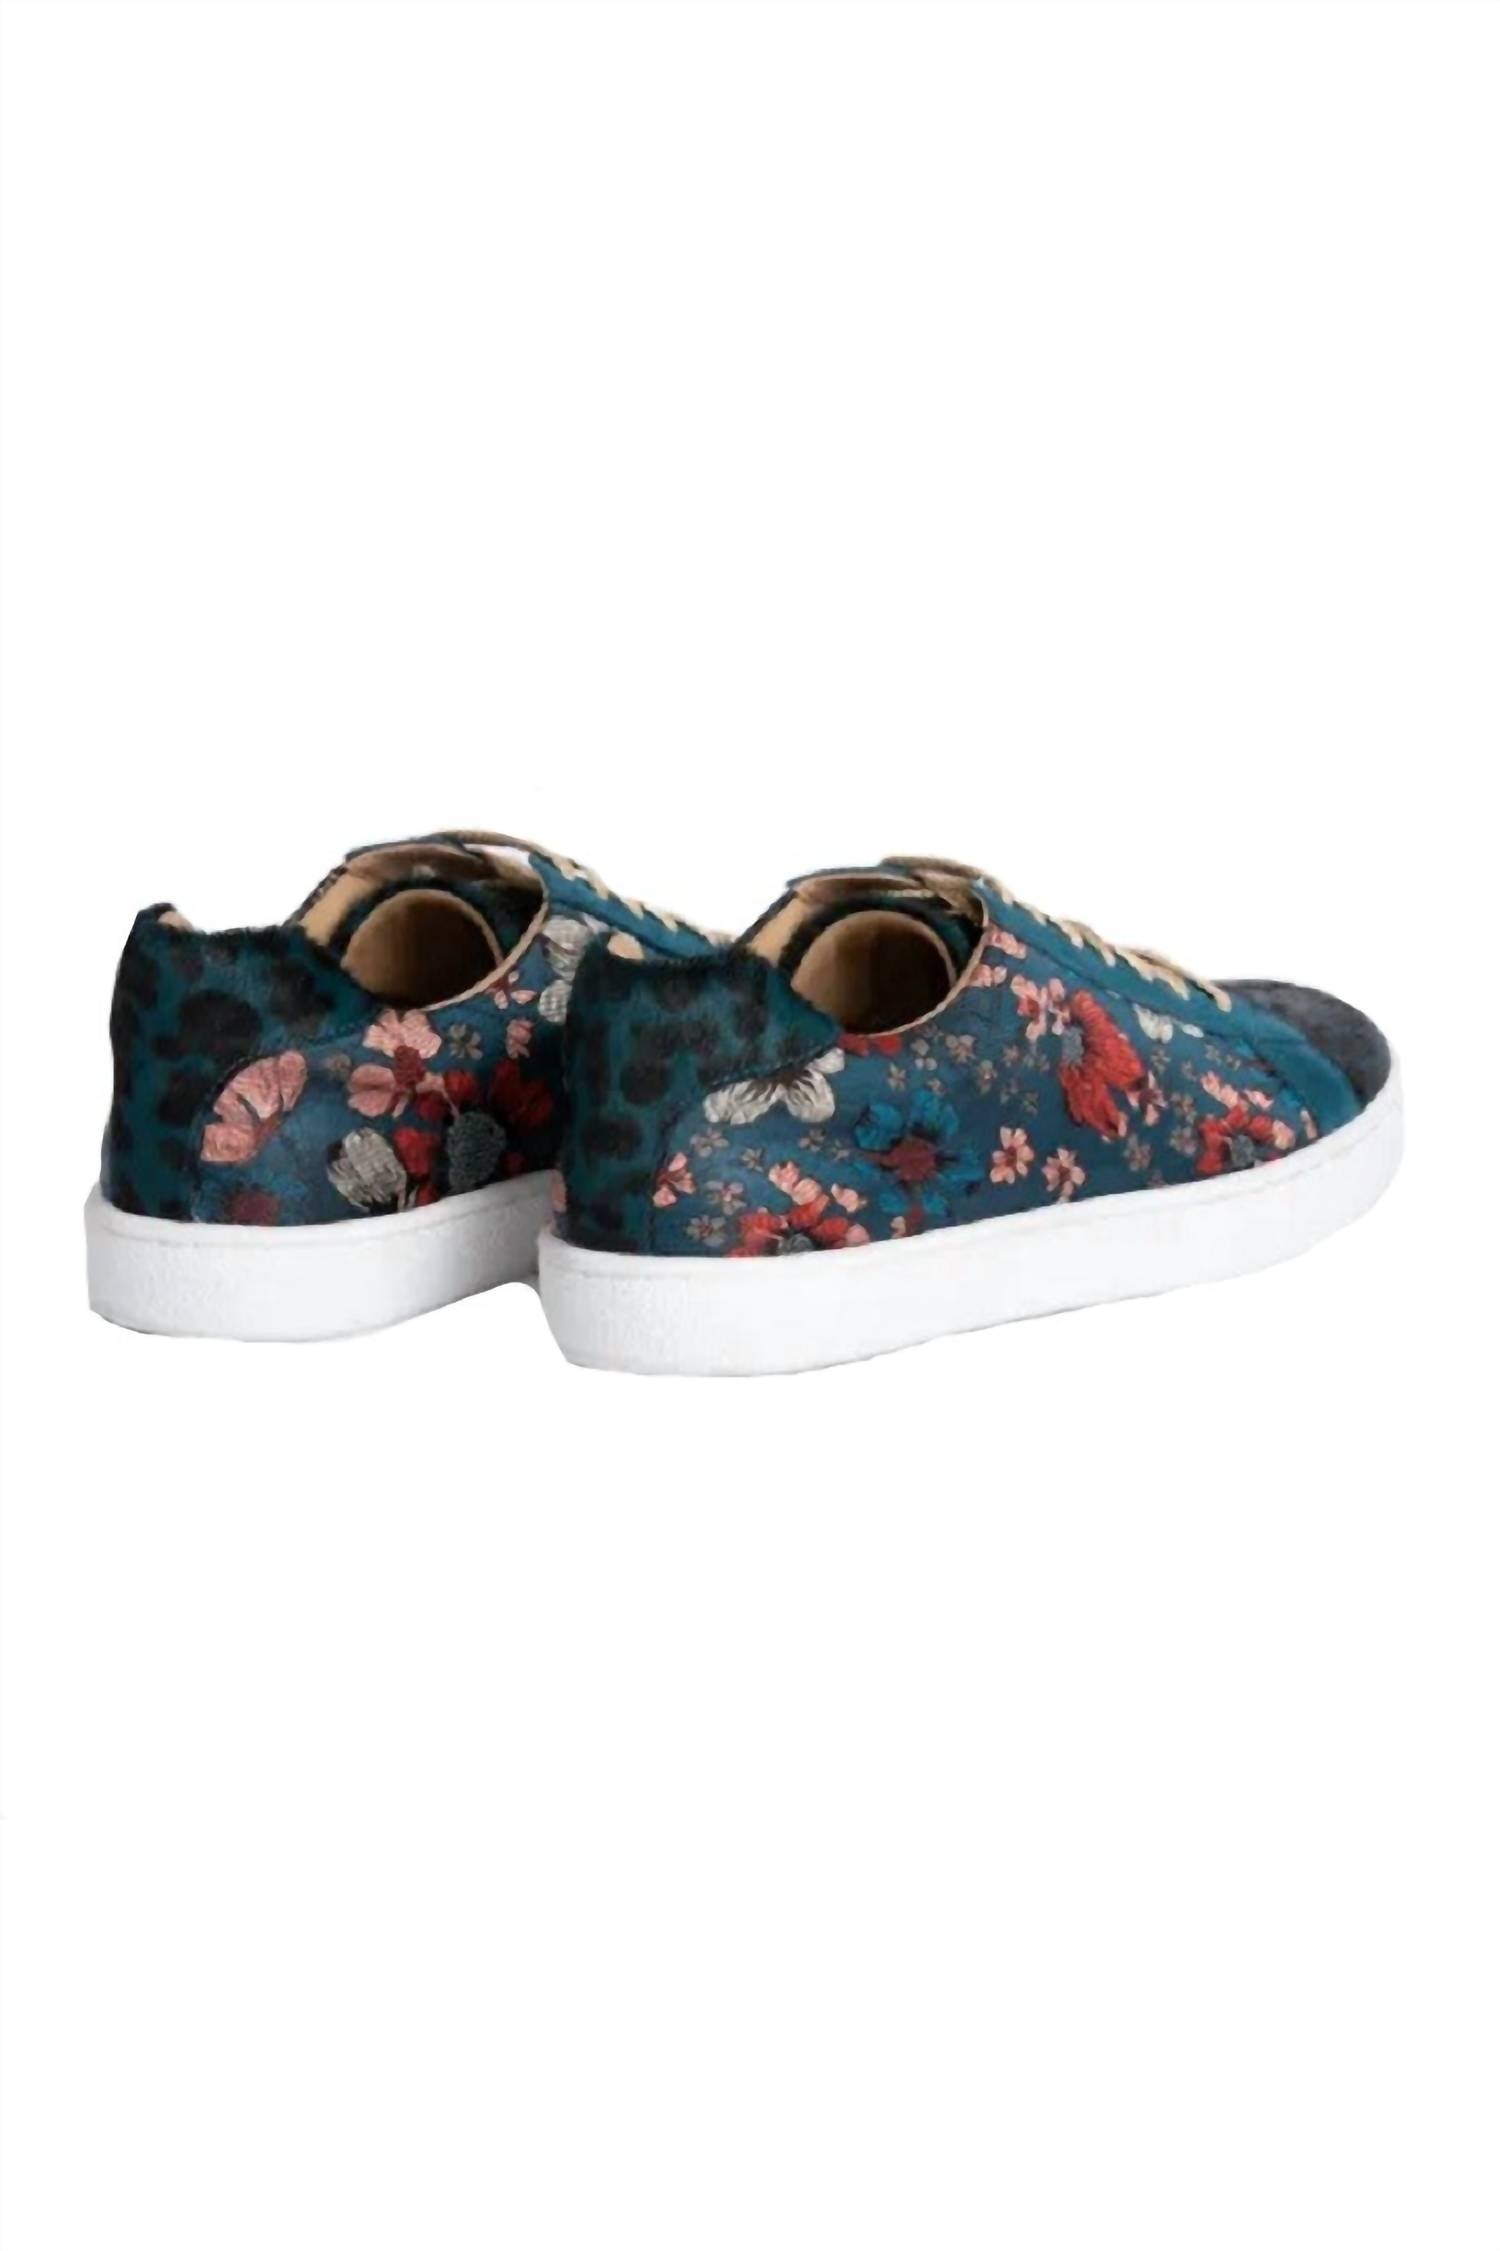 Johnny Was - Women's Floral Jacquard Sneakers